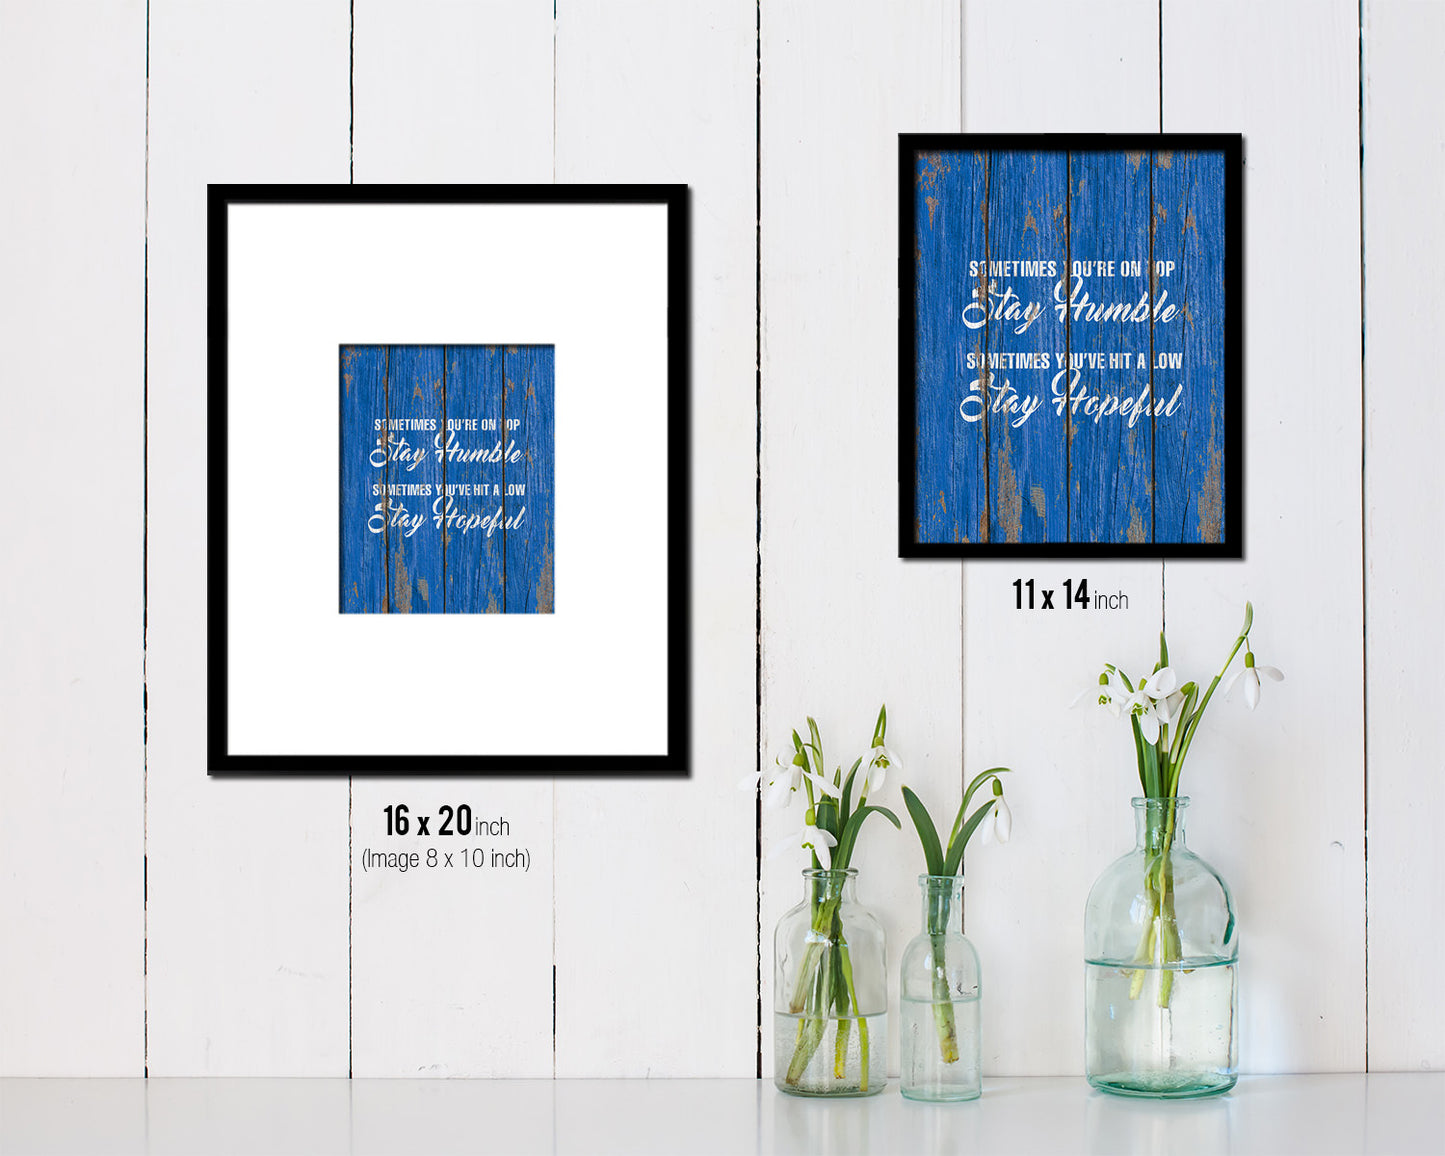 Sometimes you're on top stay humble Quote Framed Print Home Decor Wall Art Gifts